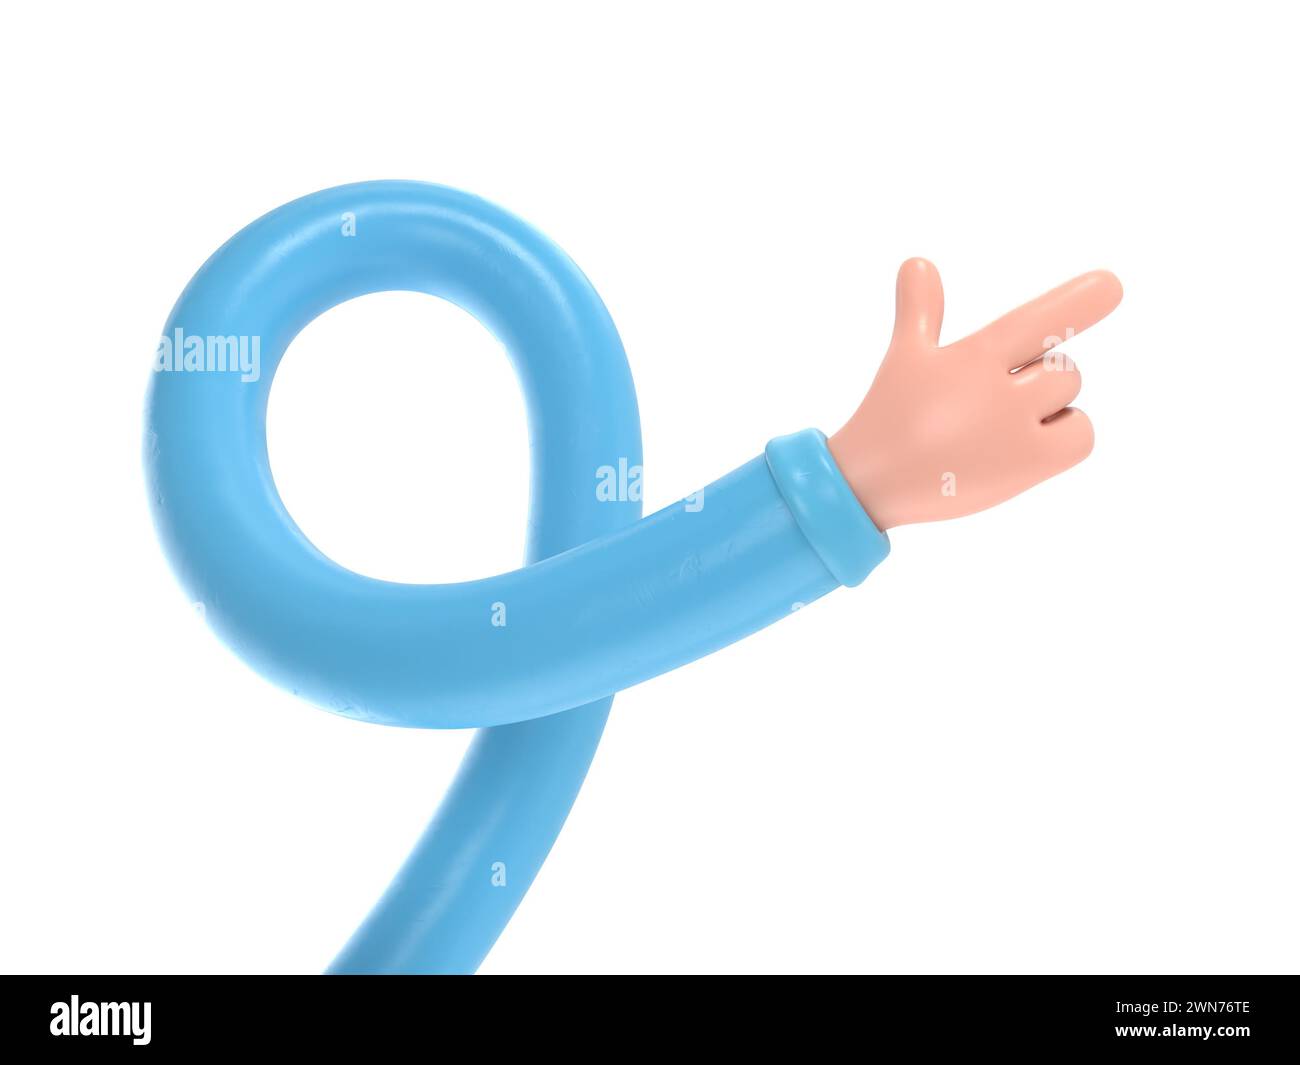 Cartoon Gesture Icon Mockup.Cartoon character hand pointing gesture. 3D rendering on white background.long arms concept. Stock Photo